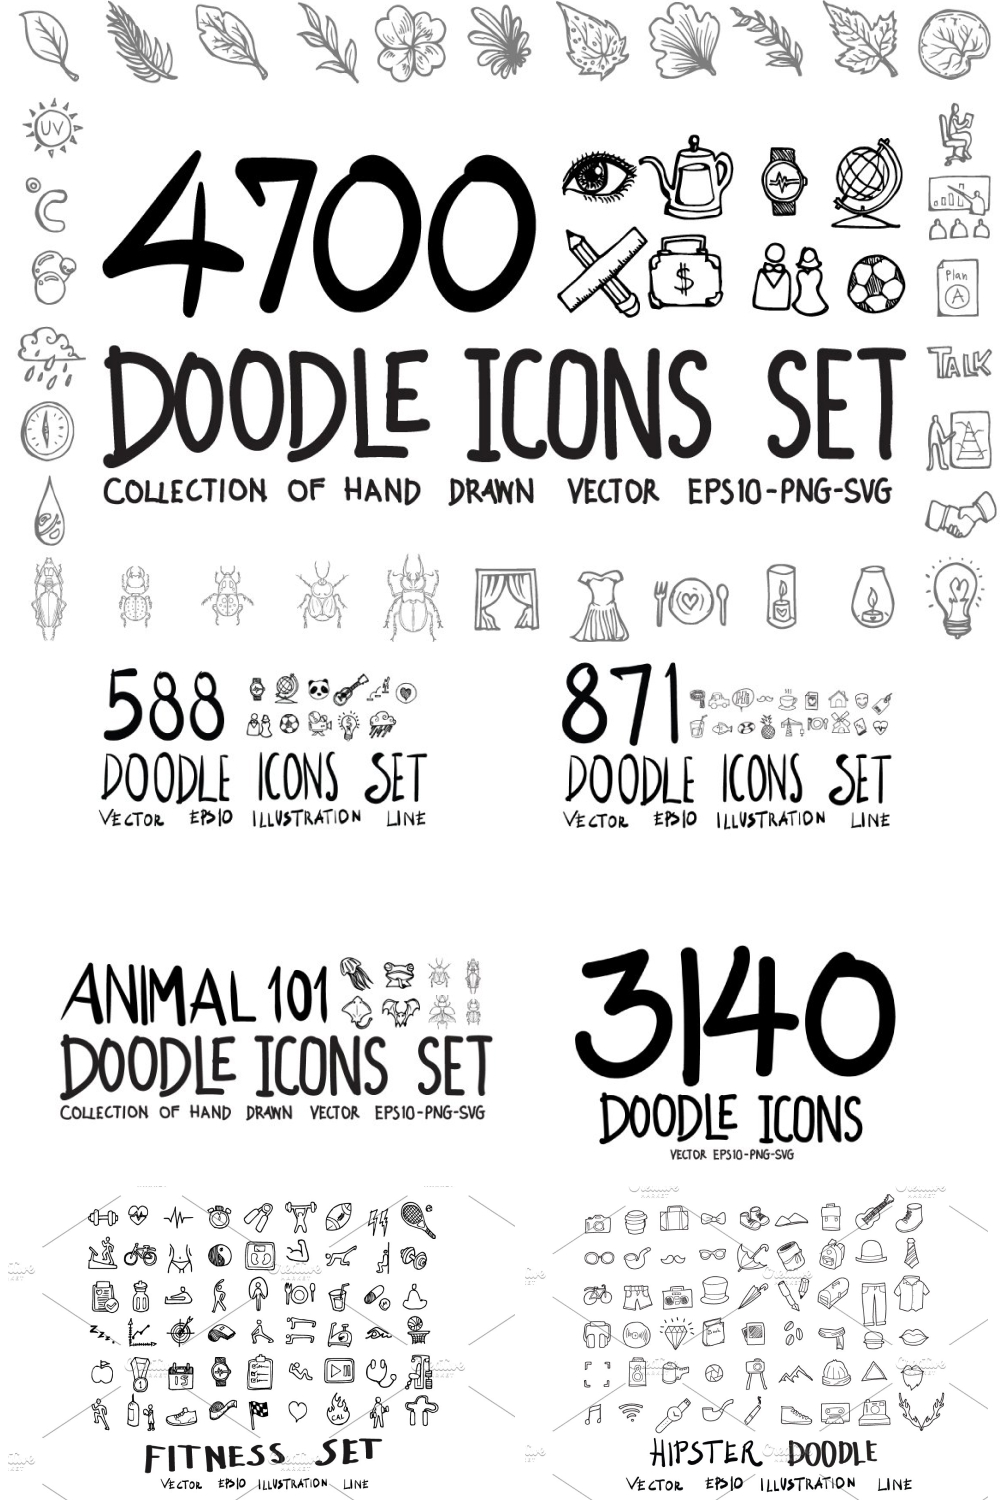 4700 Hand Drawn Doodle Icons - Pinterest.